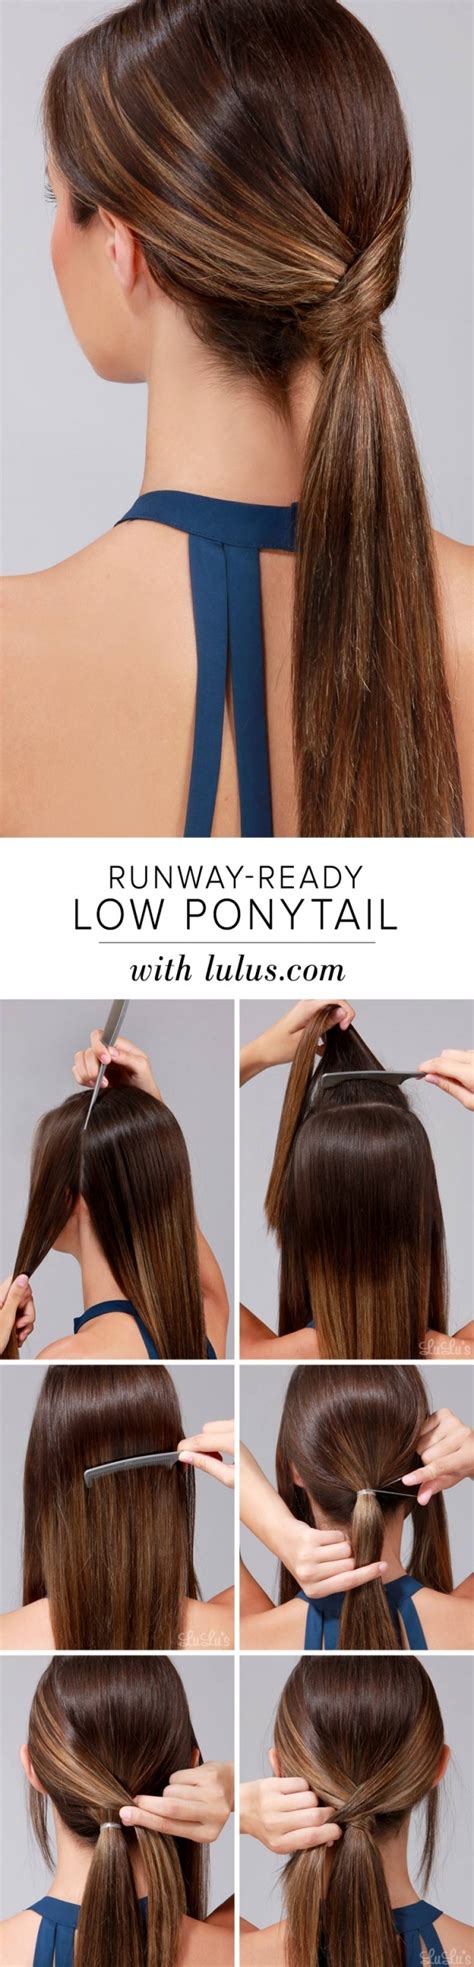 Simple Yet Stunning Hairstyle Tutorials For Lazy Women Styles Weekly